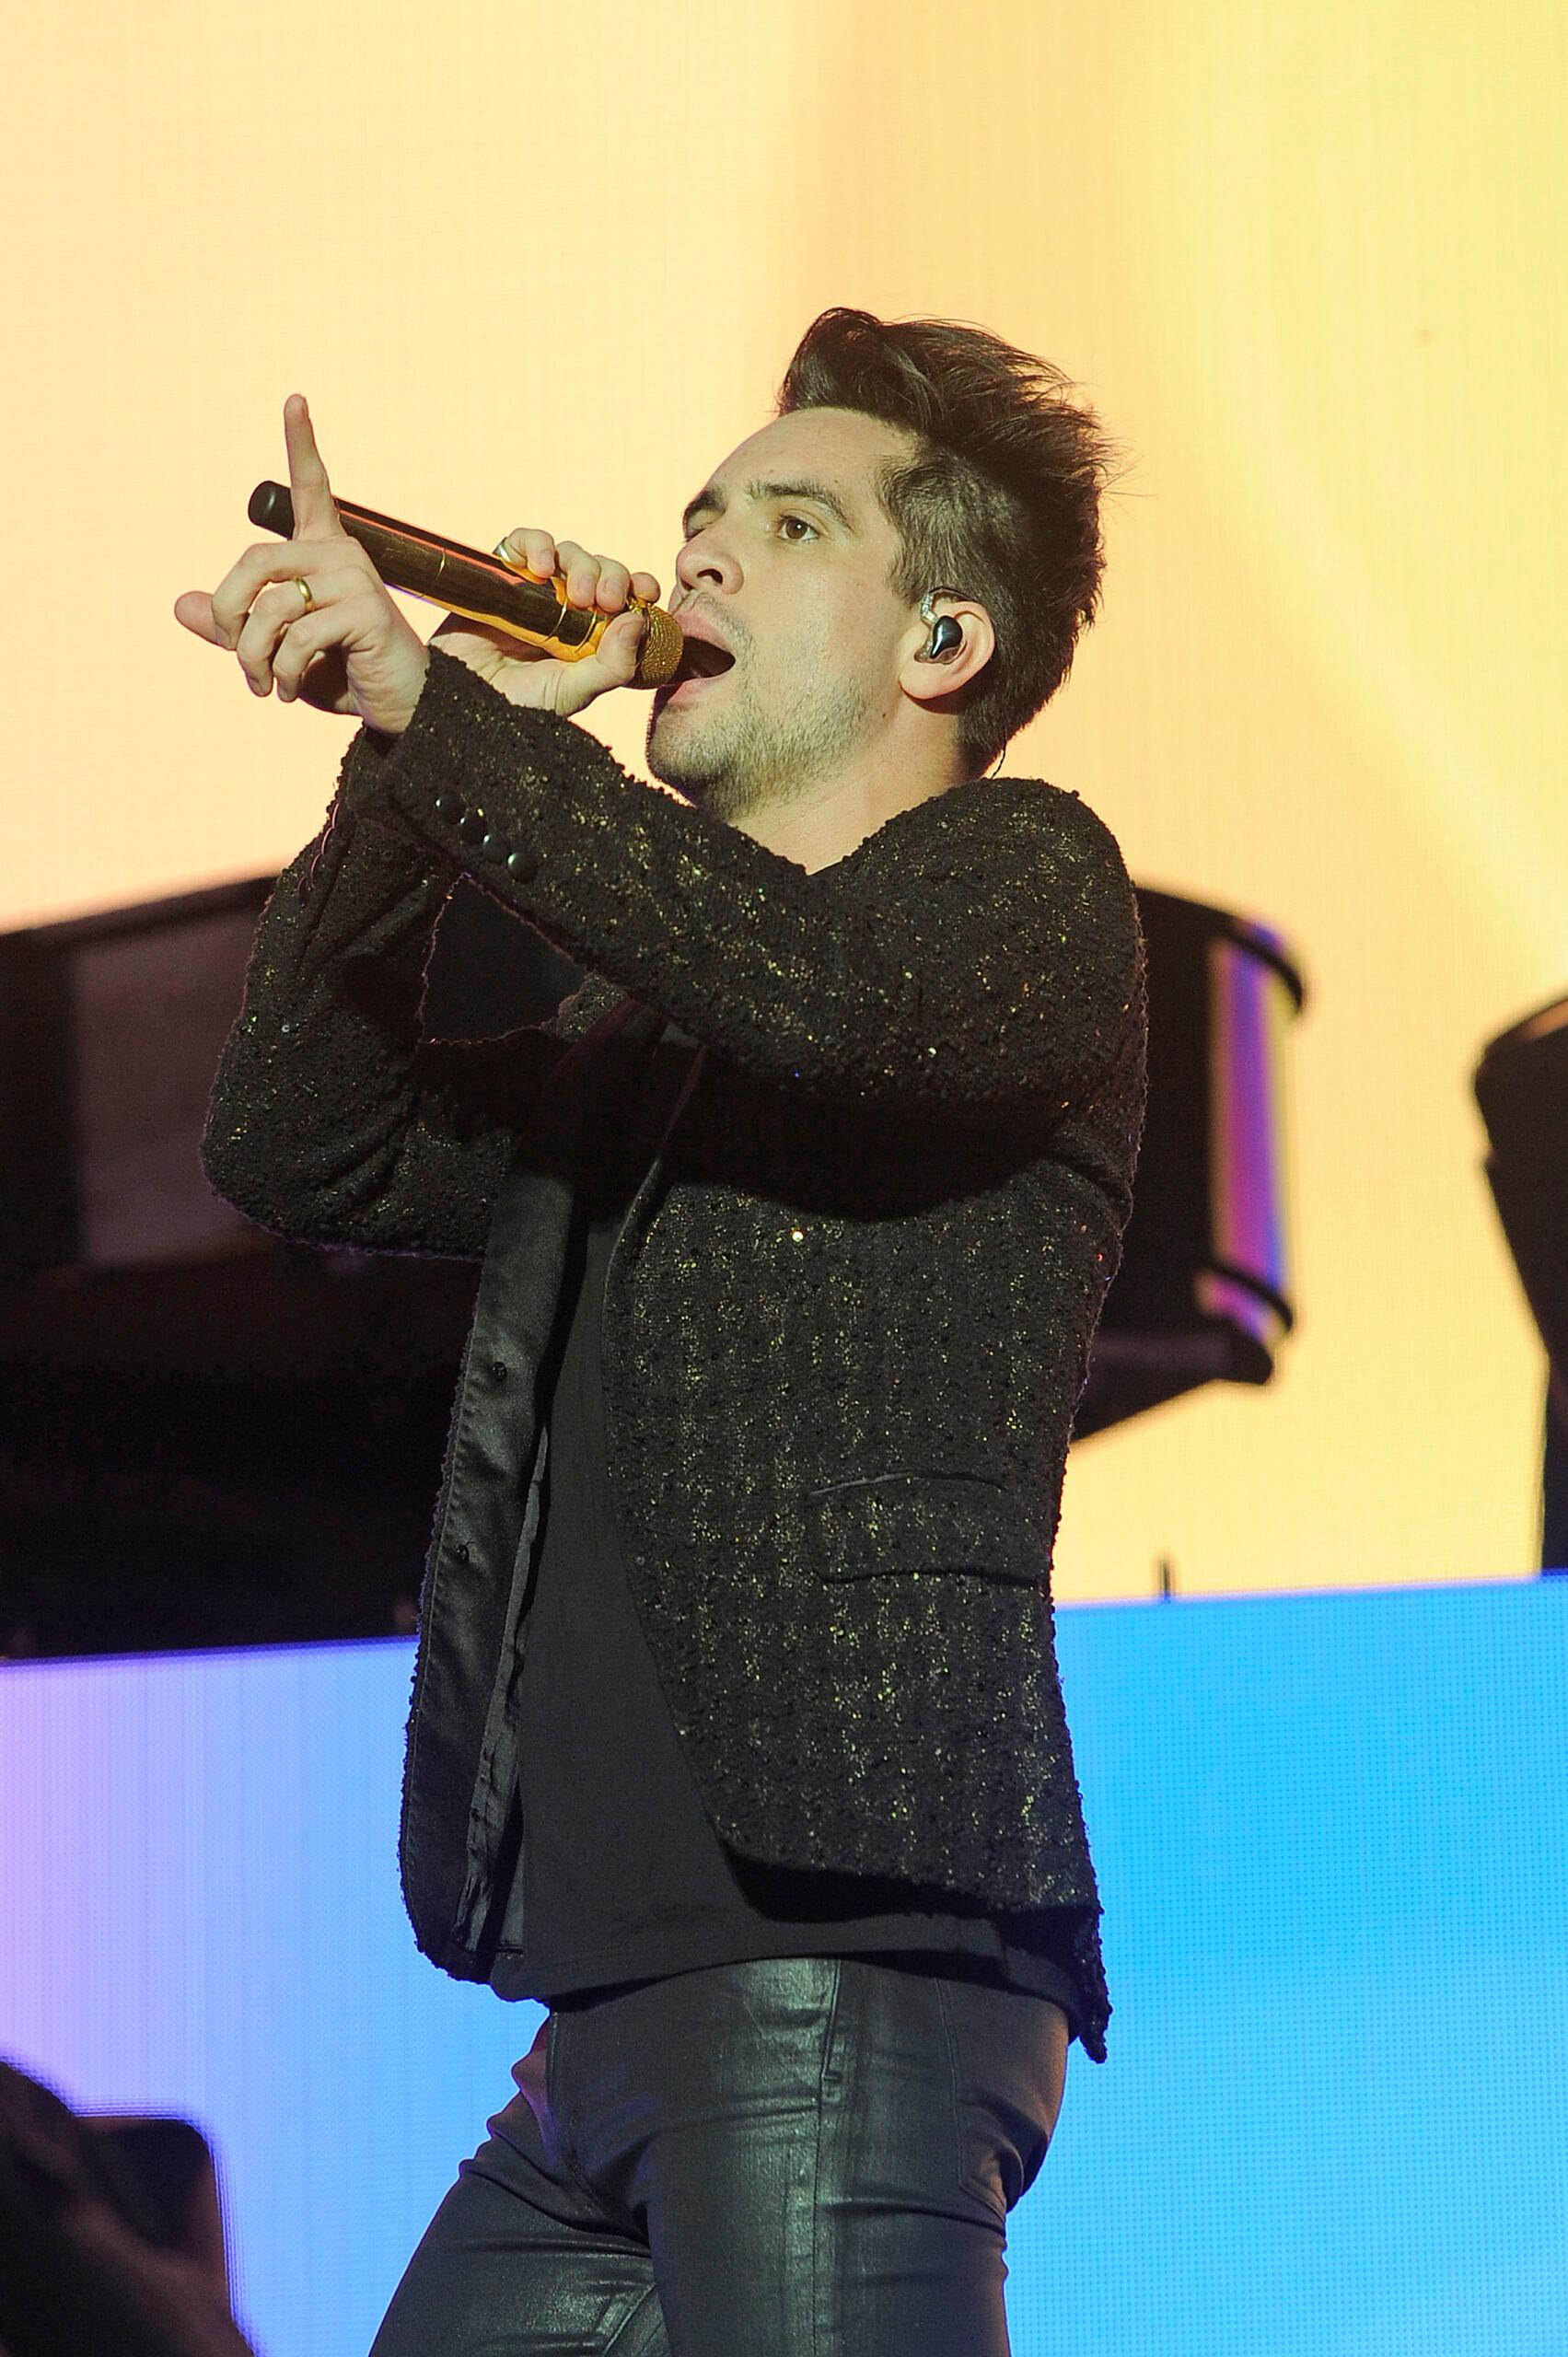 Panic! at the Disco performing at Reading Festival 2018